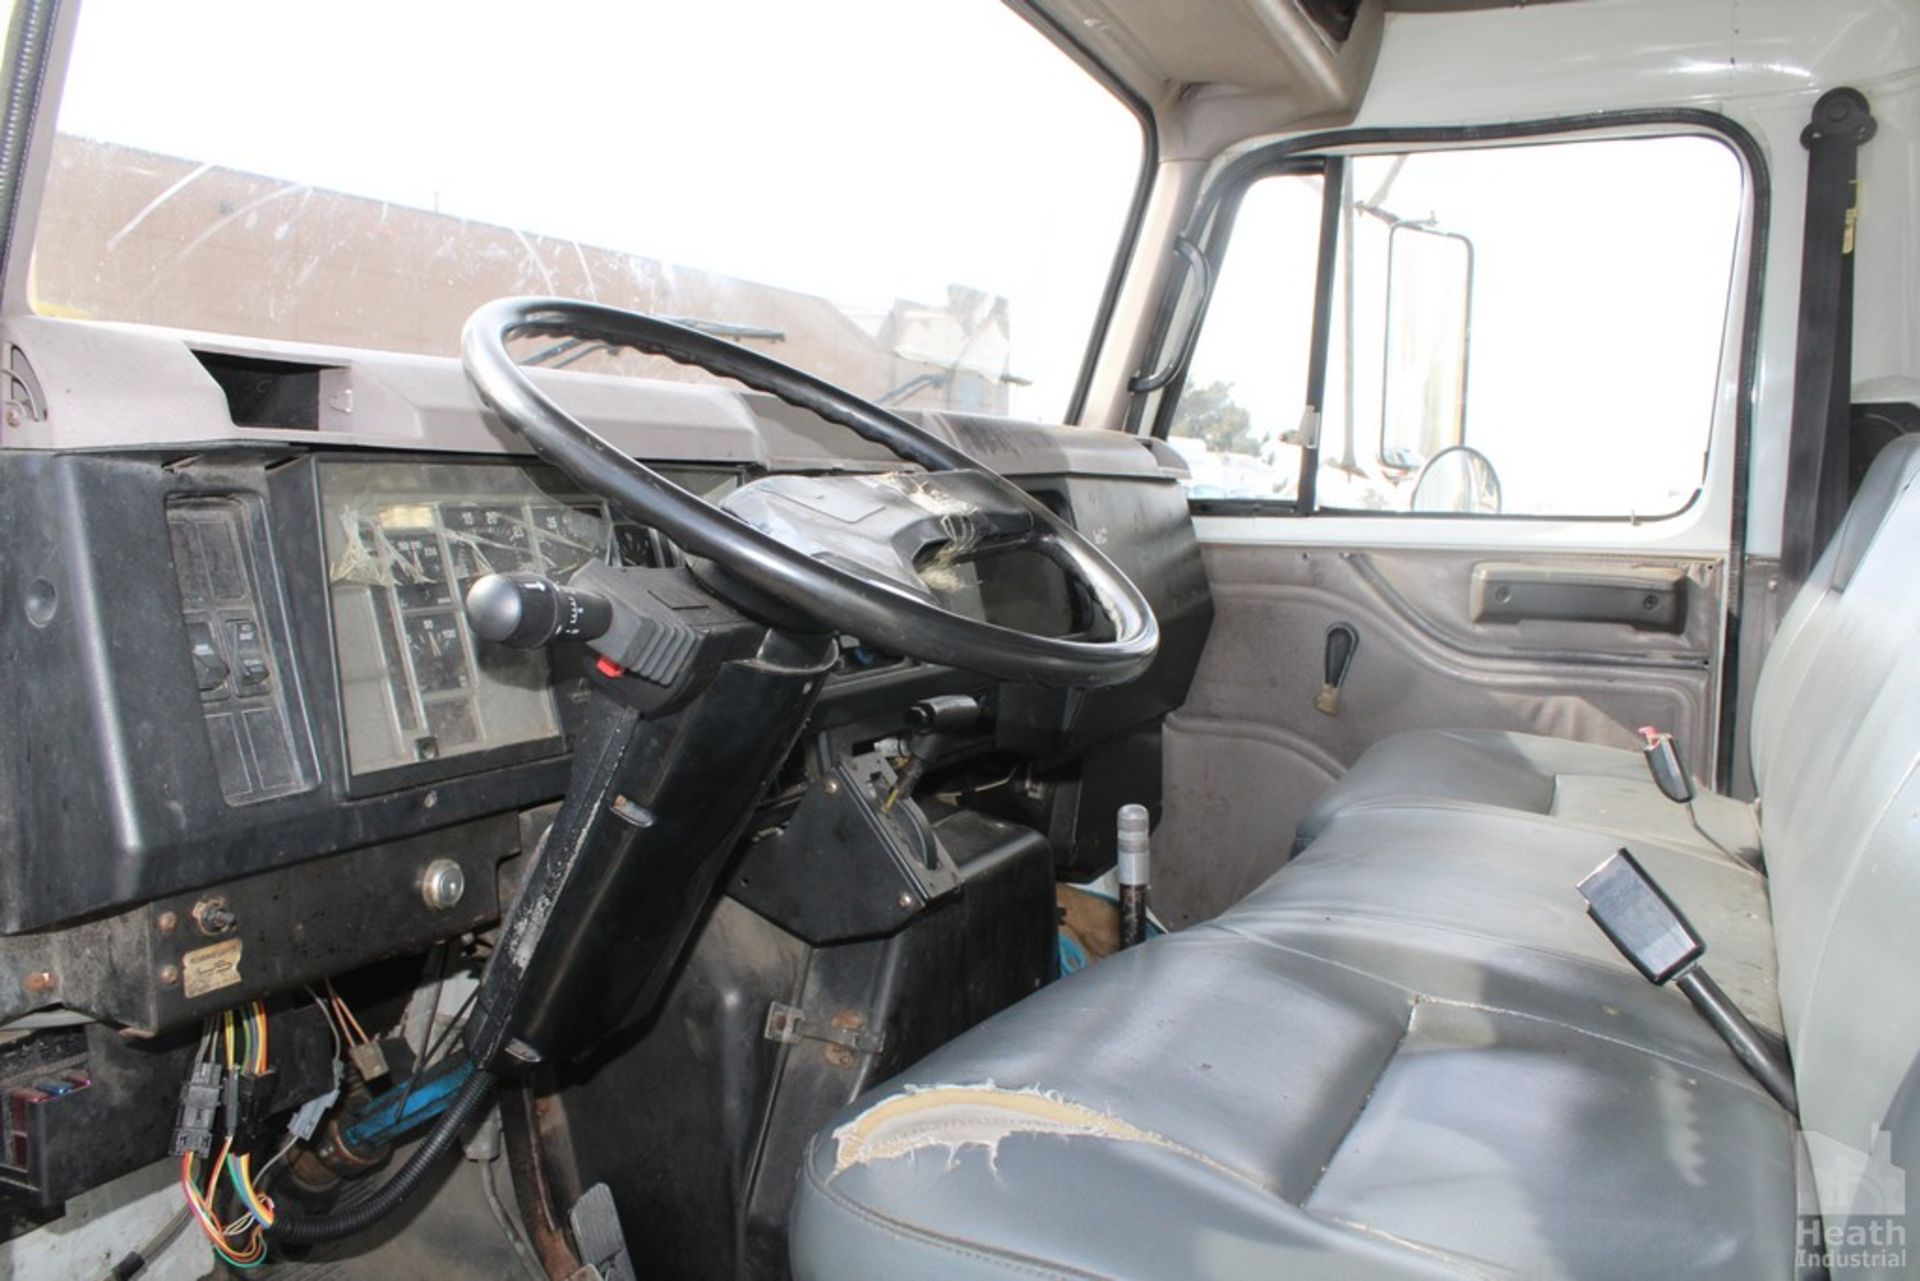 1998 INTERNATIONAL 4700 28FT MOVERS TRUCK, 7.6L L6 DIESEL ENGINE, 162,324 MILES SHOWN ON ODOMETER, - Image 7 of 12